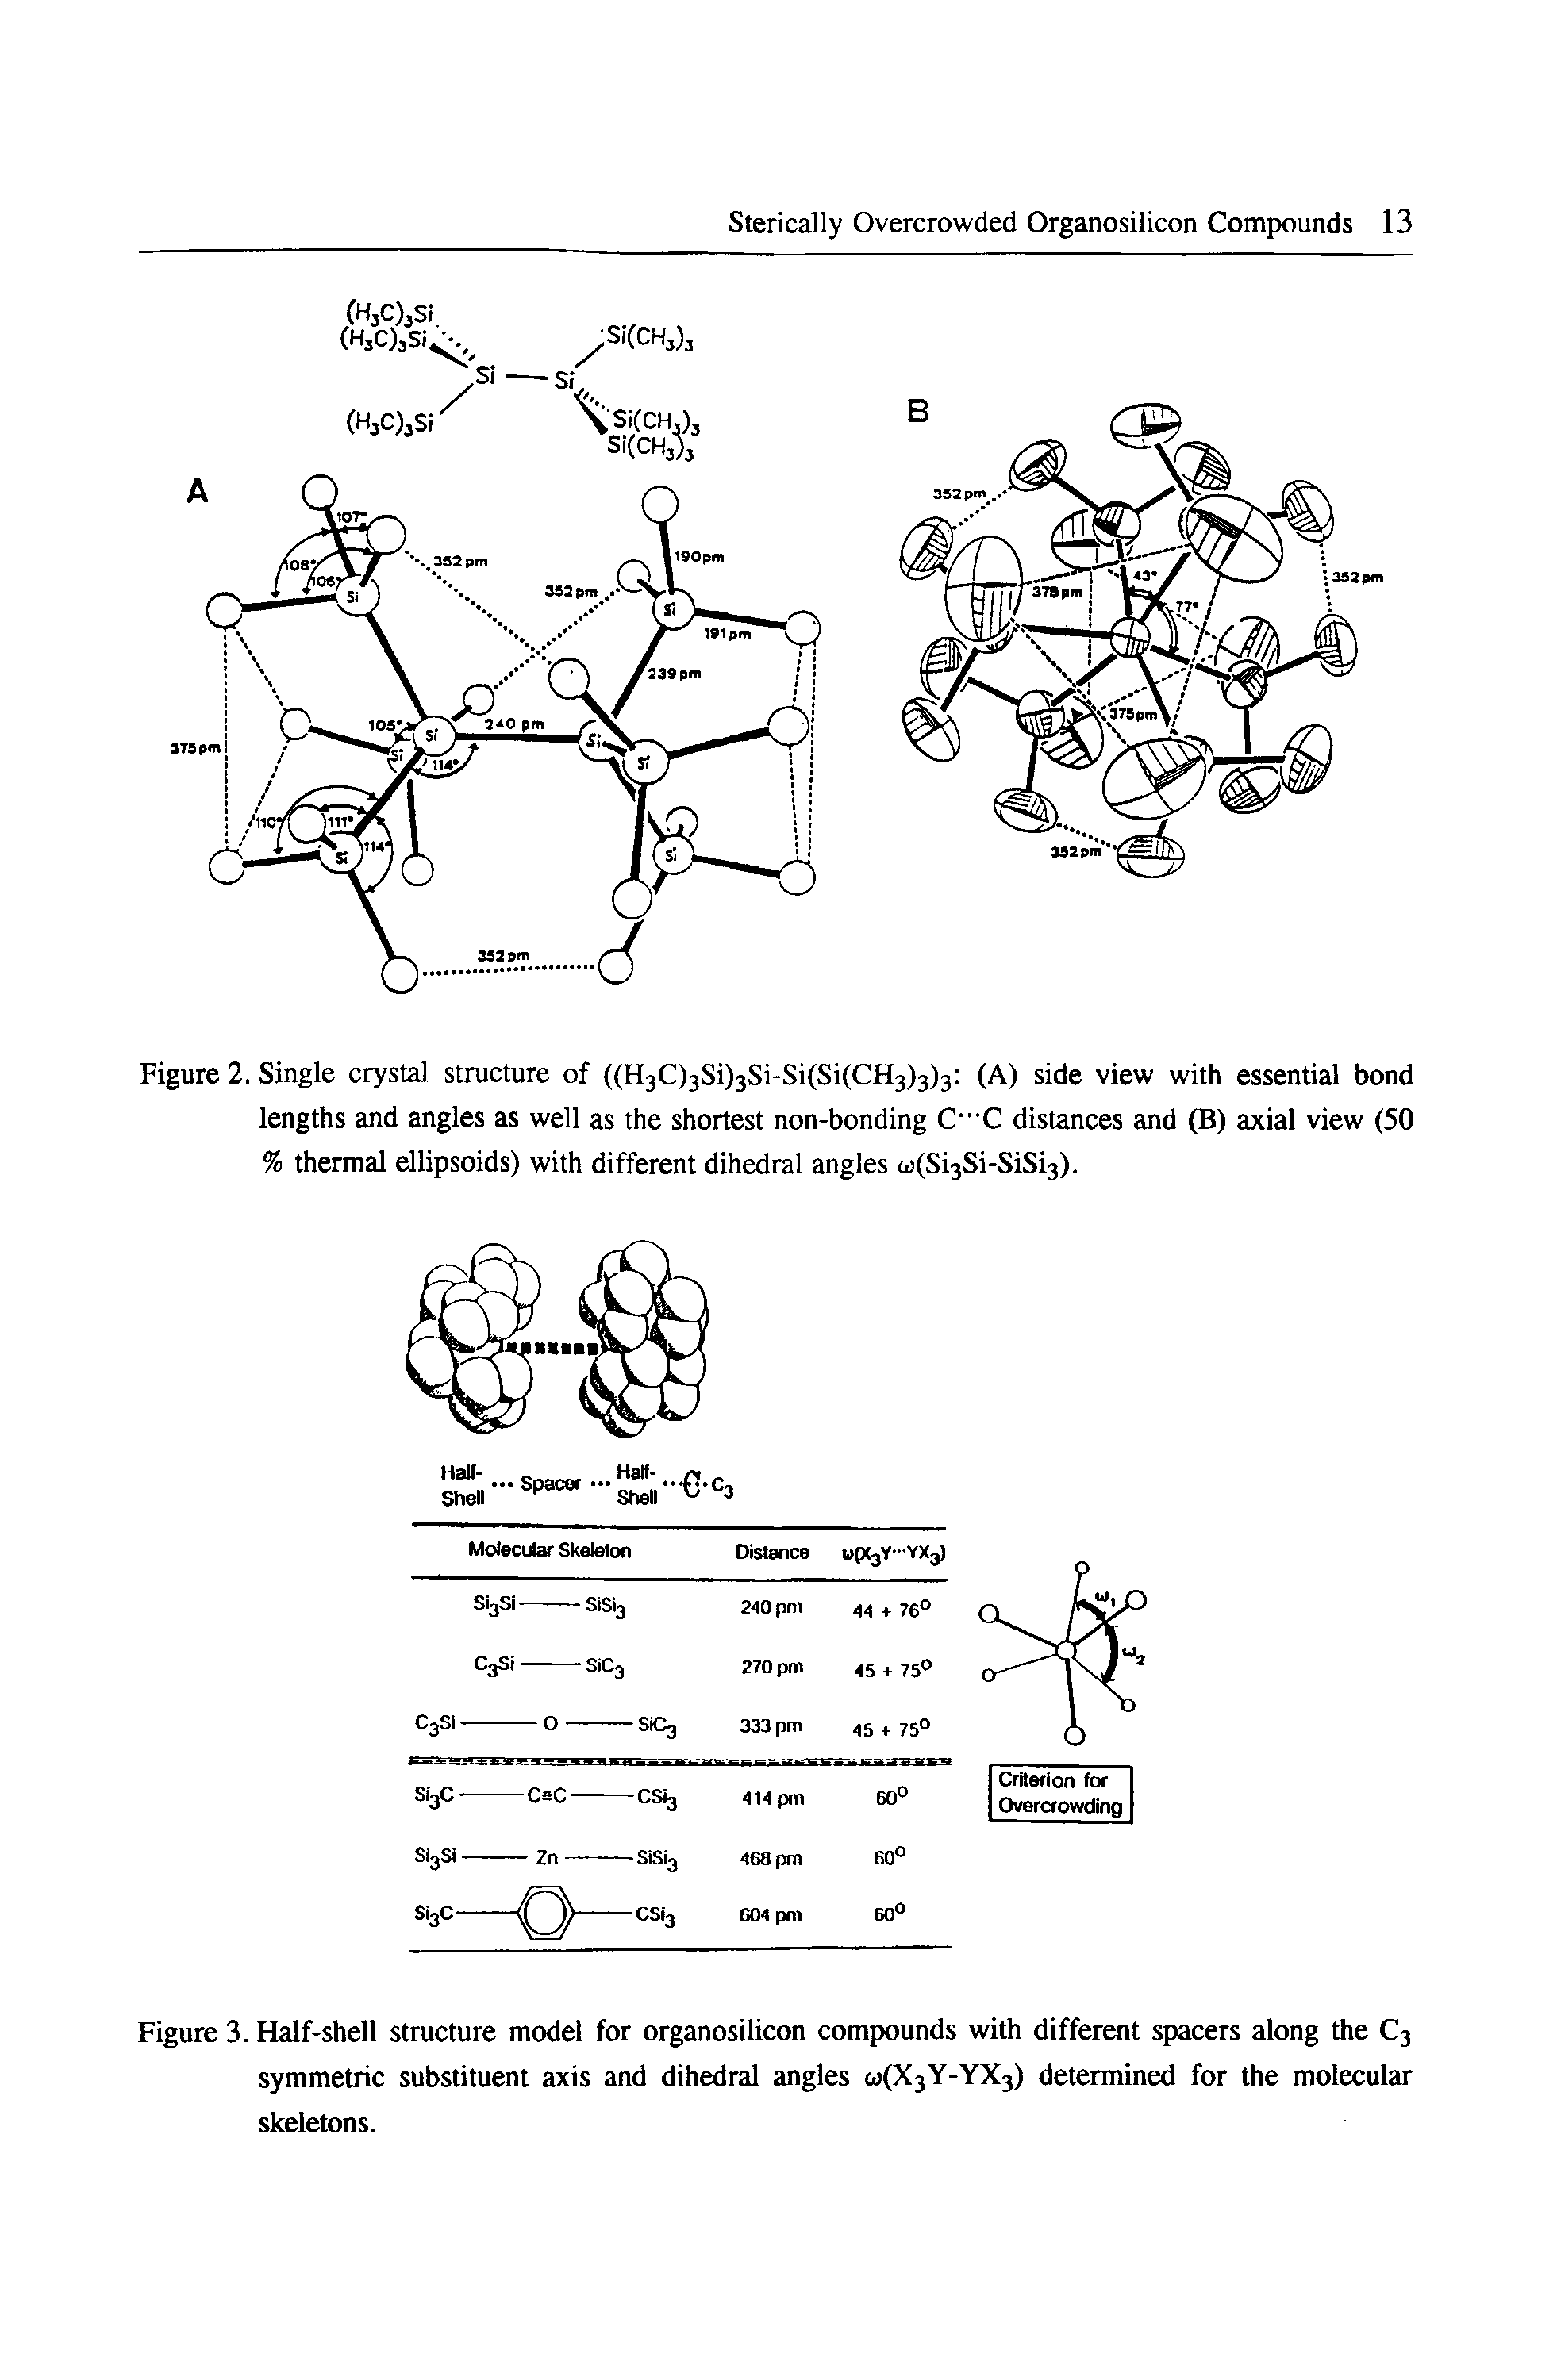 Figure 3. Half-shell structure model for organosilicon compounds with different spacers along the C3 symmetric substituent axis and dihedral angles go(X3Y-YX3) determined for the molecular skeletons.